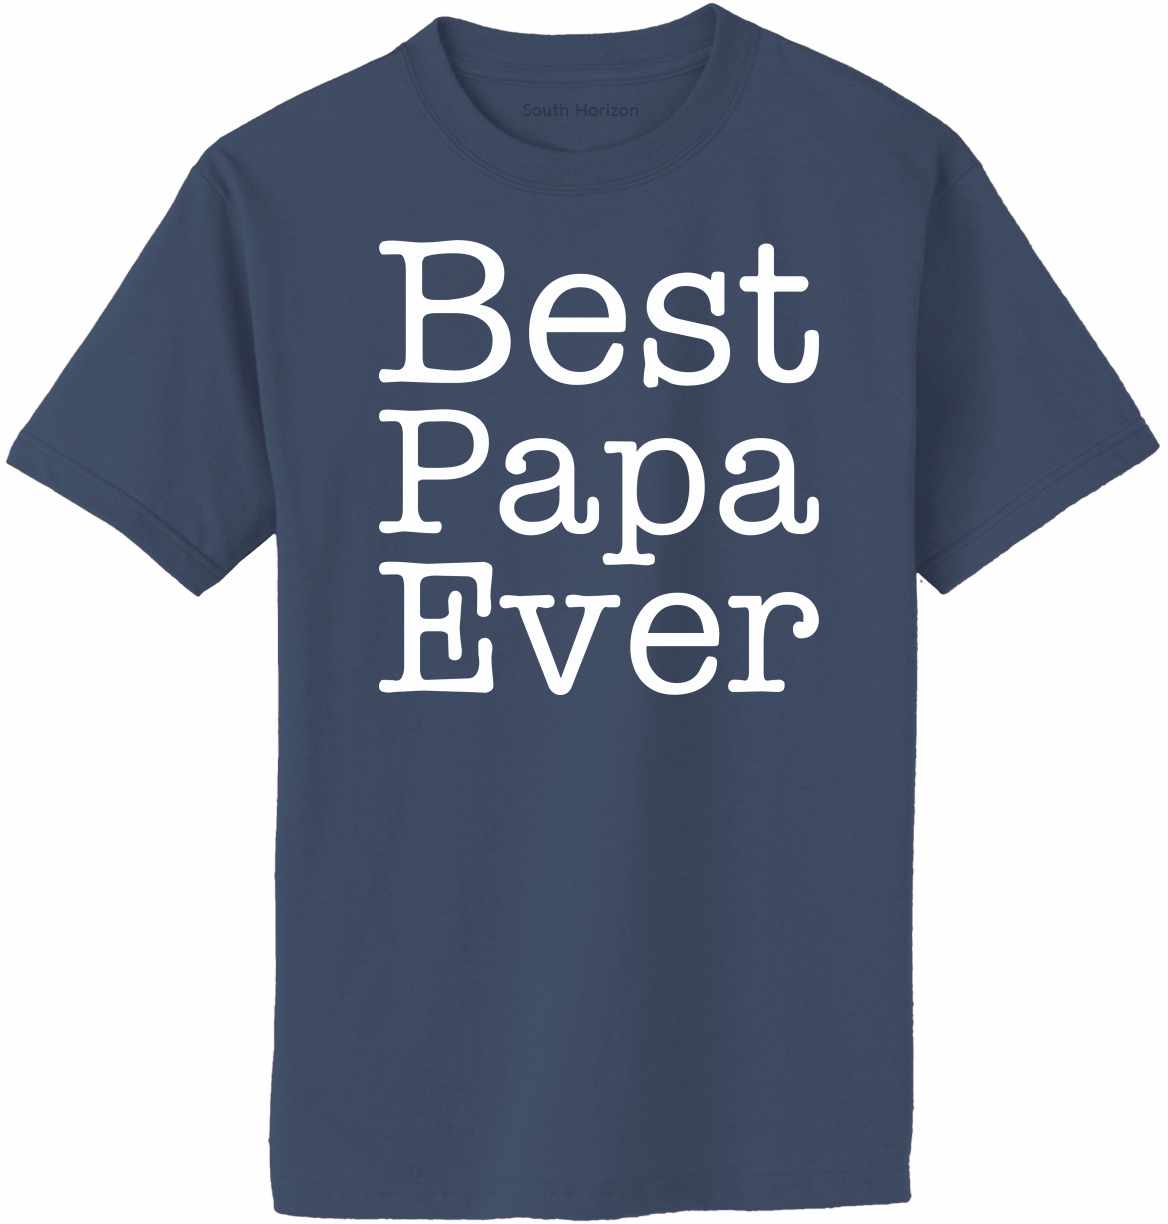 Best Papa Ever on Adult T-Shirt (#872-1)